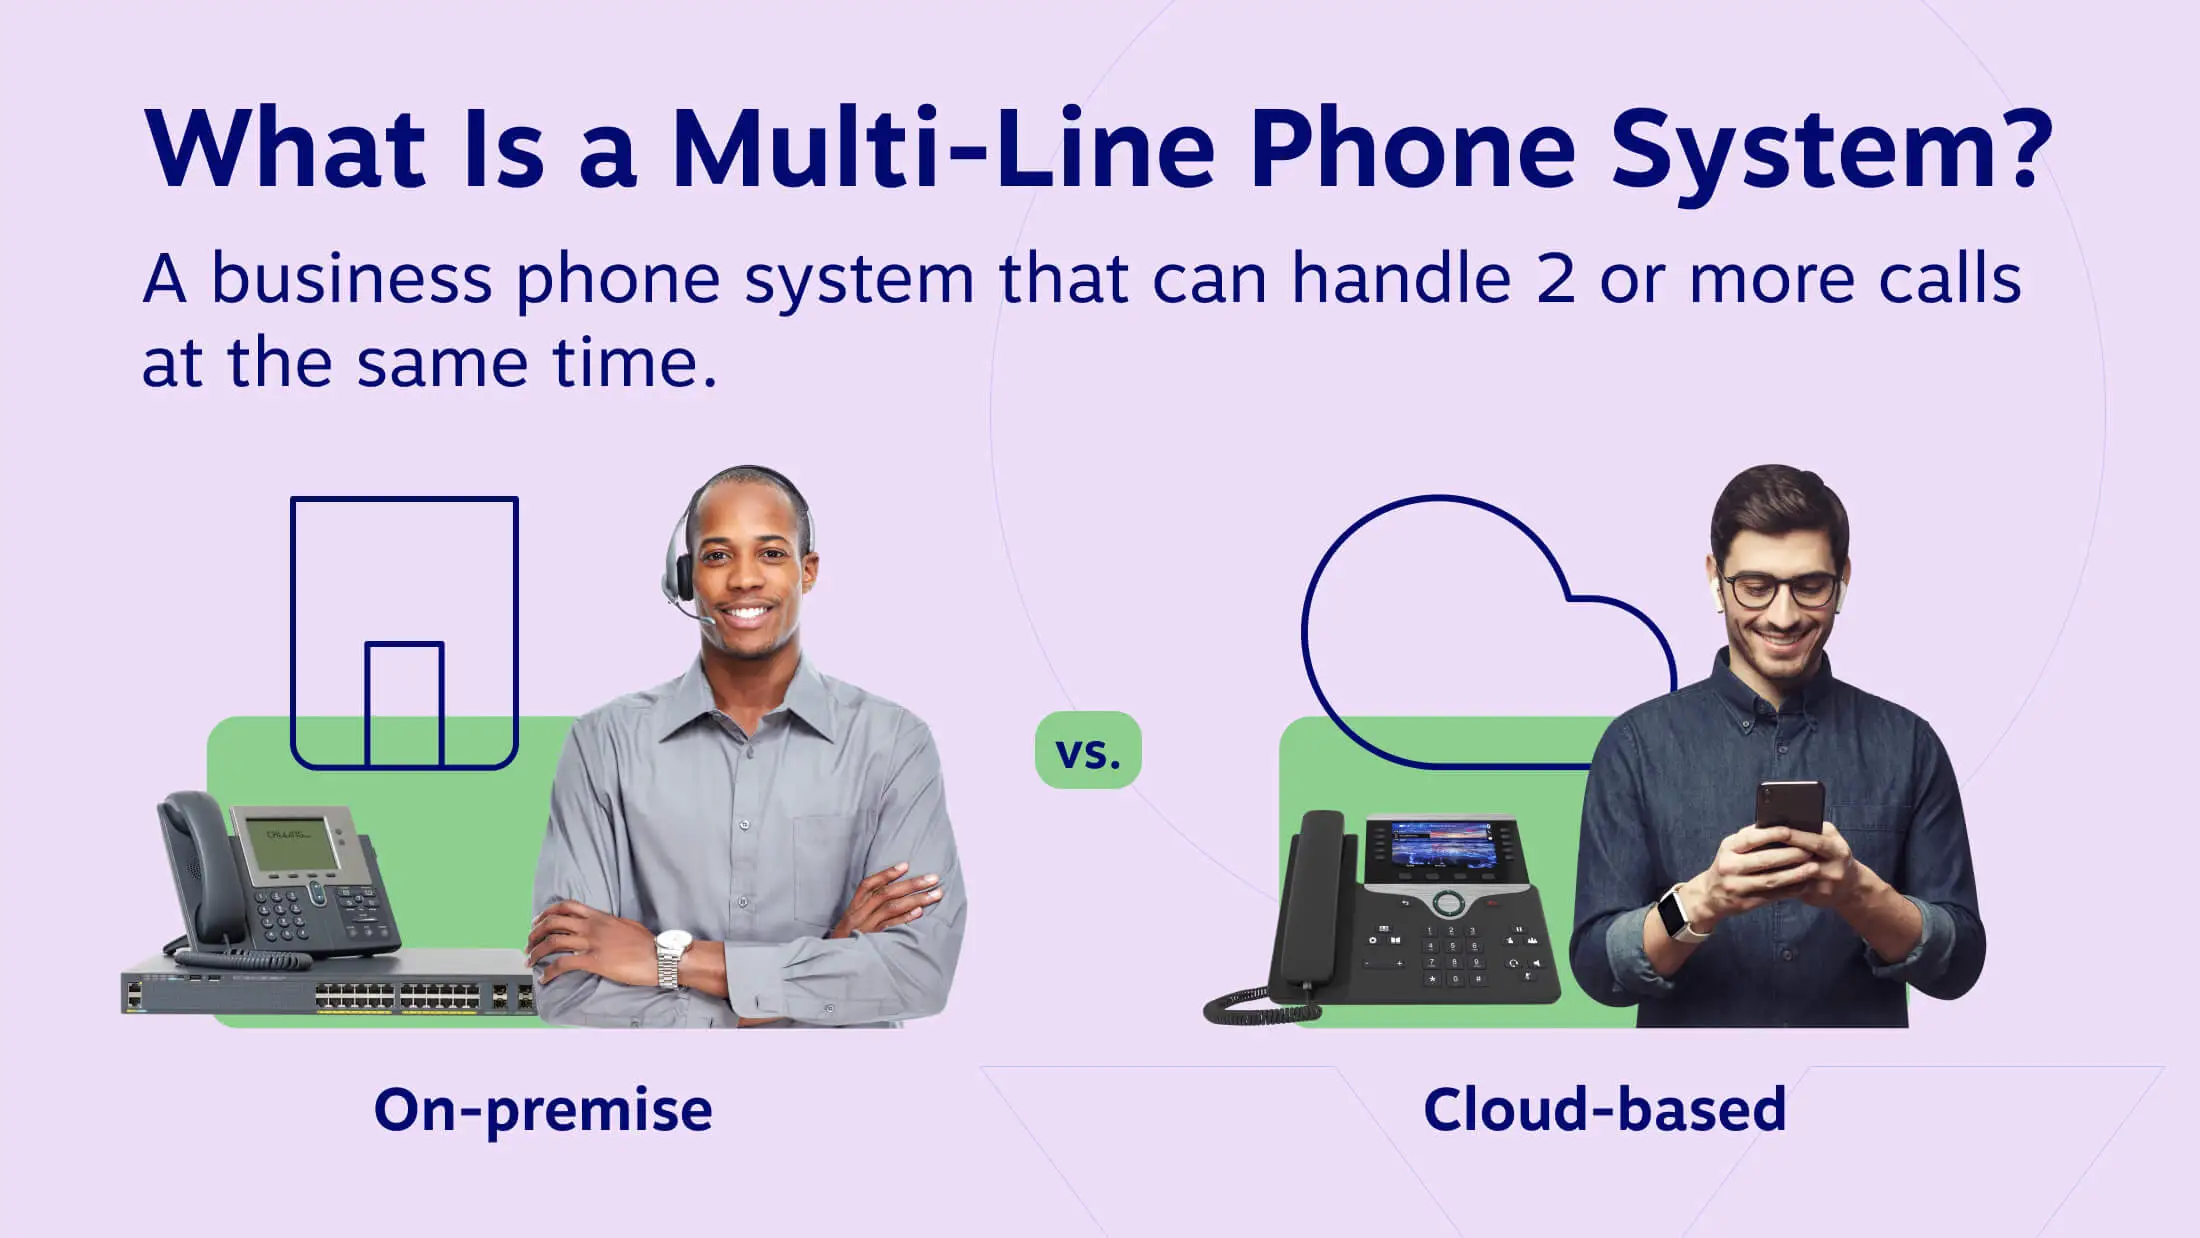 What is a multi-line phone system?